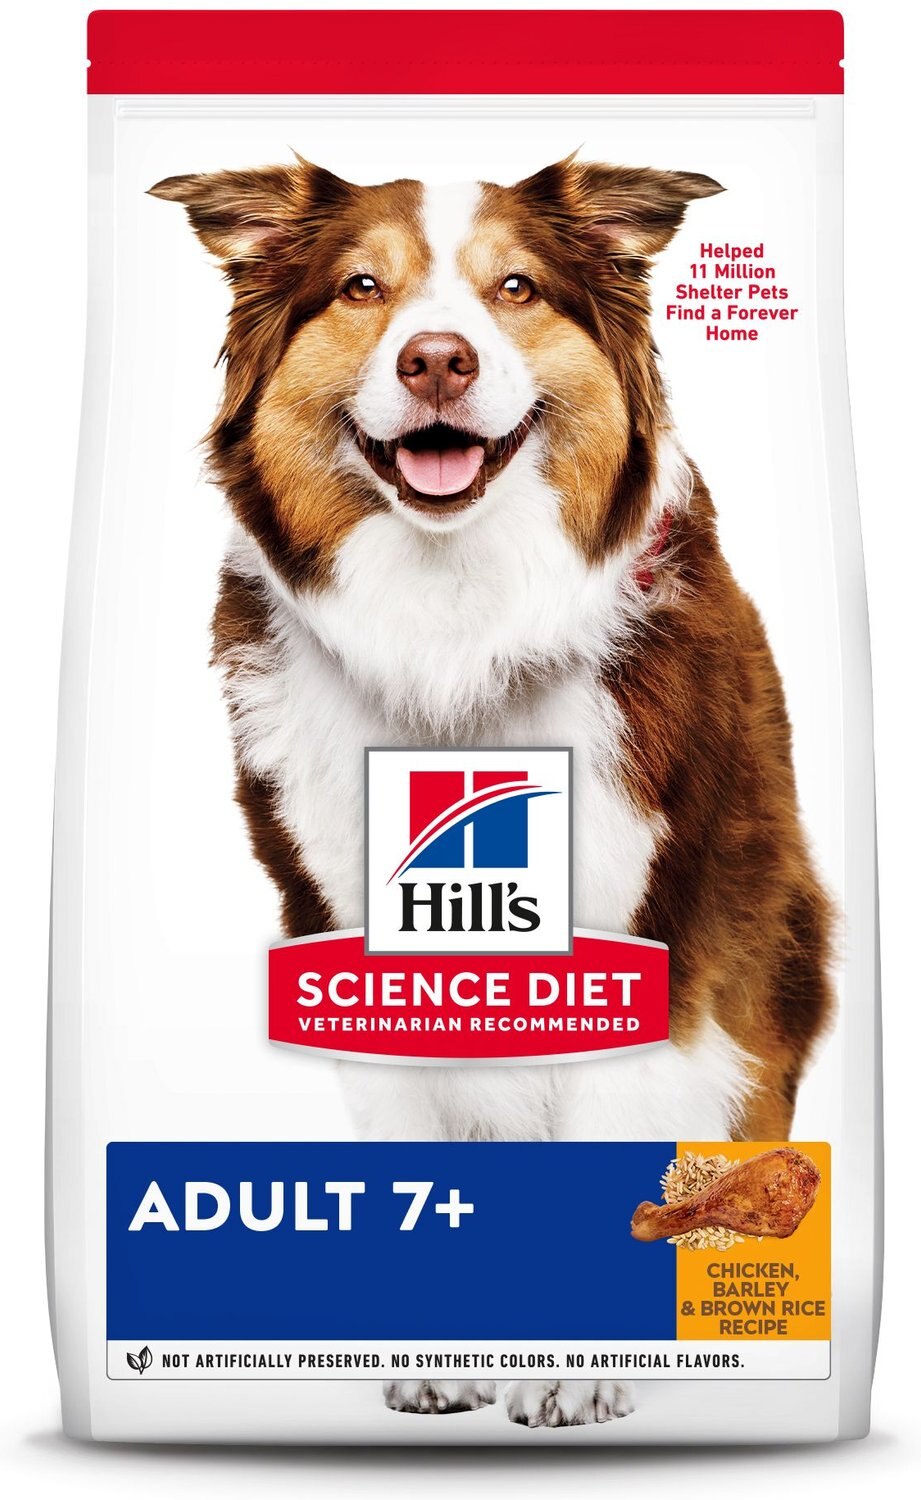 HILL'S SCIENCE DIET Adult 7+ Meal, Rice & Barley Recipe Dry Dog Food, 15-lb bag - Chewy.com